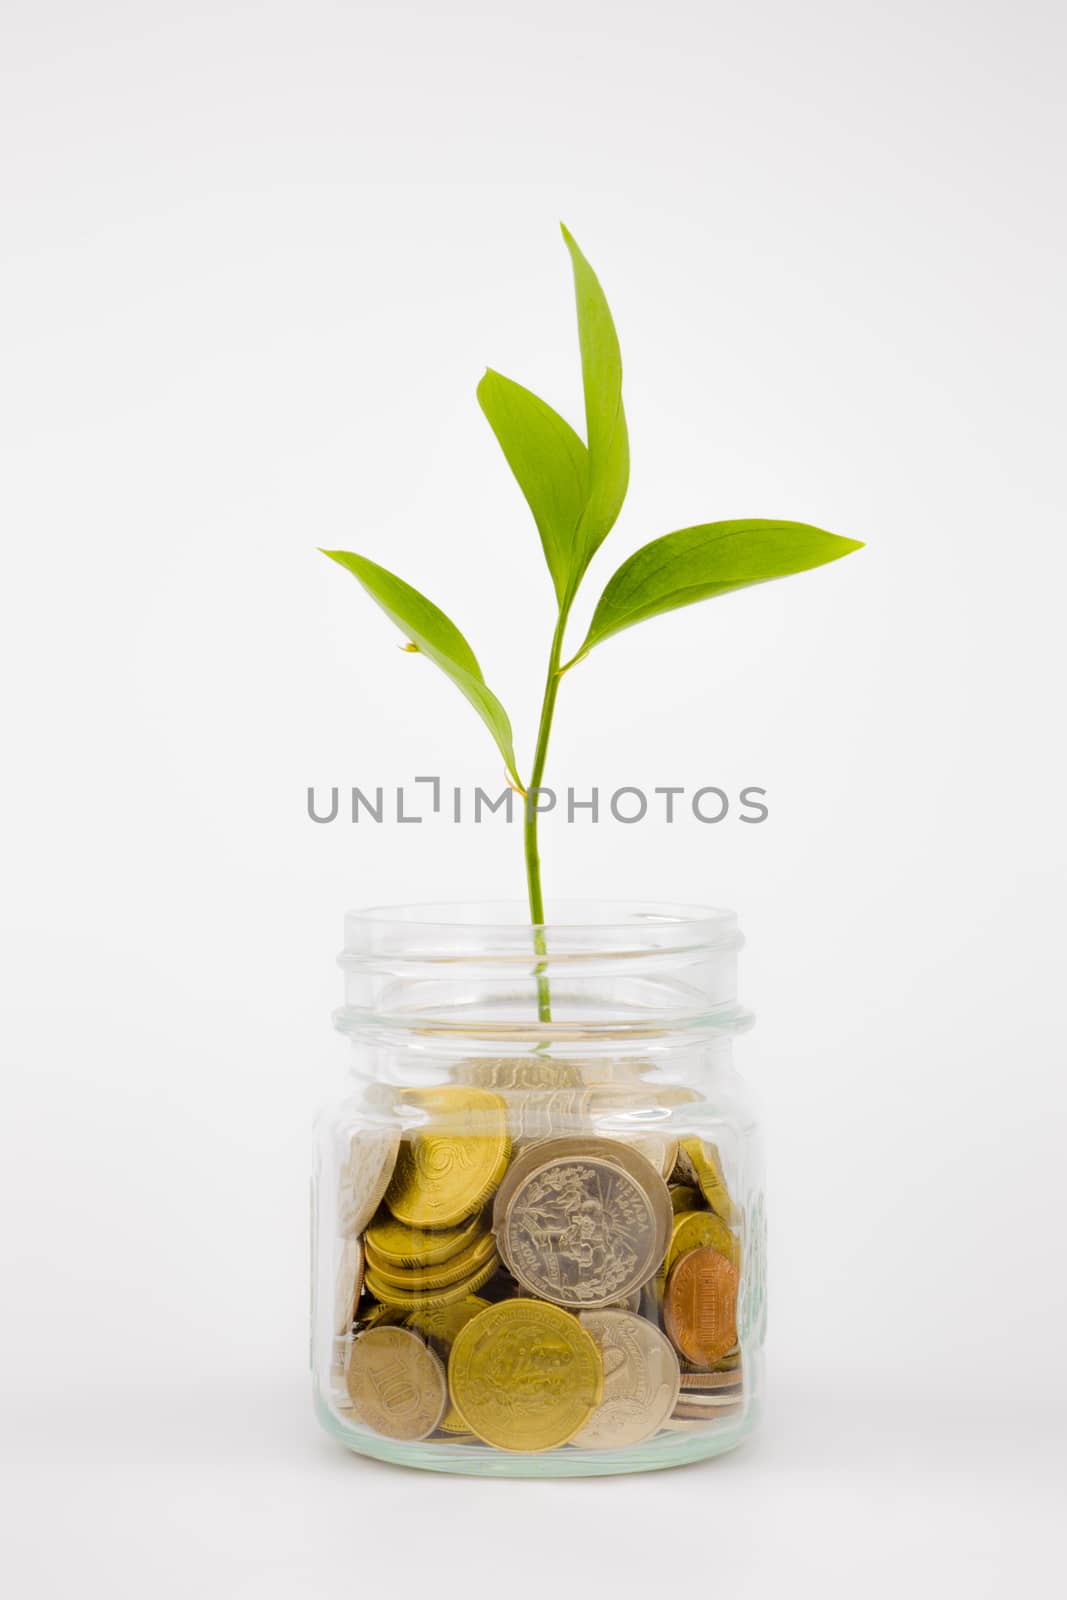 plant and coins in glass jar by vinnstock